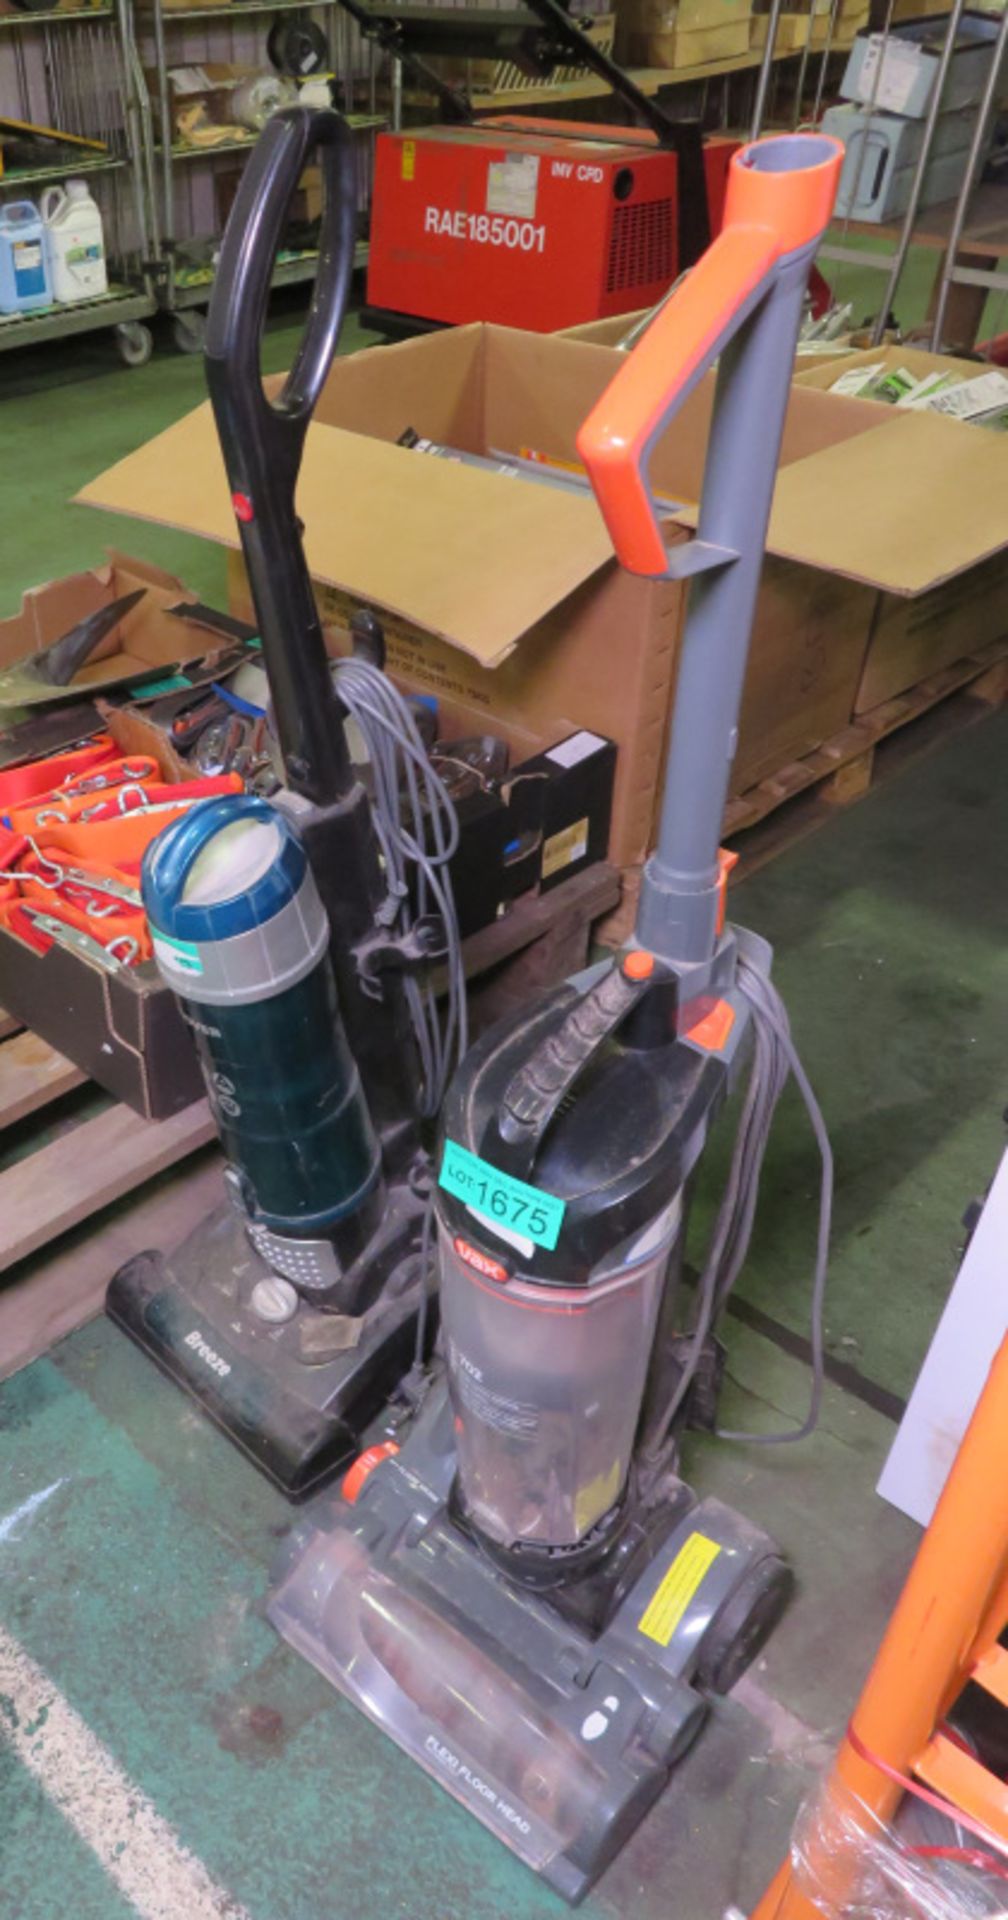 2x Upright vacuum cleaners - Image 3 of 7